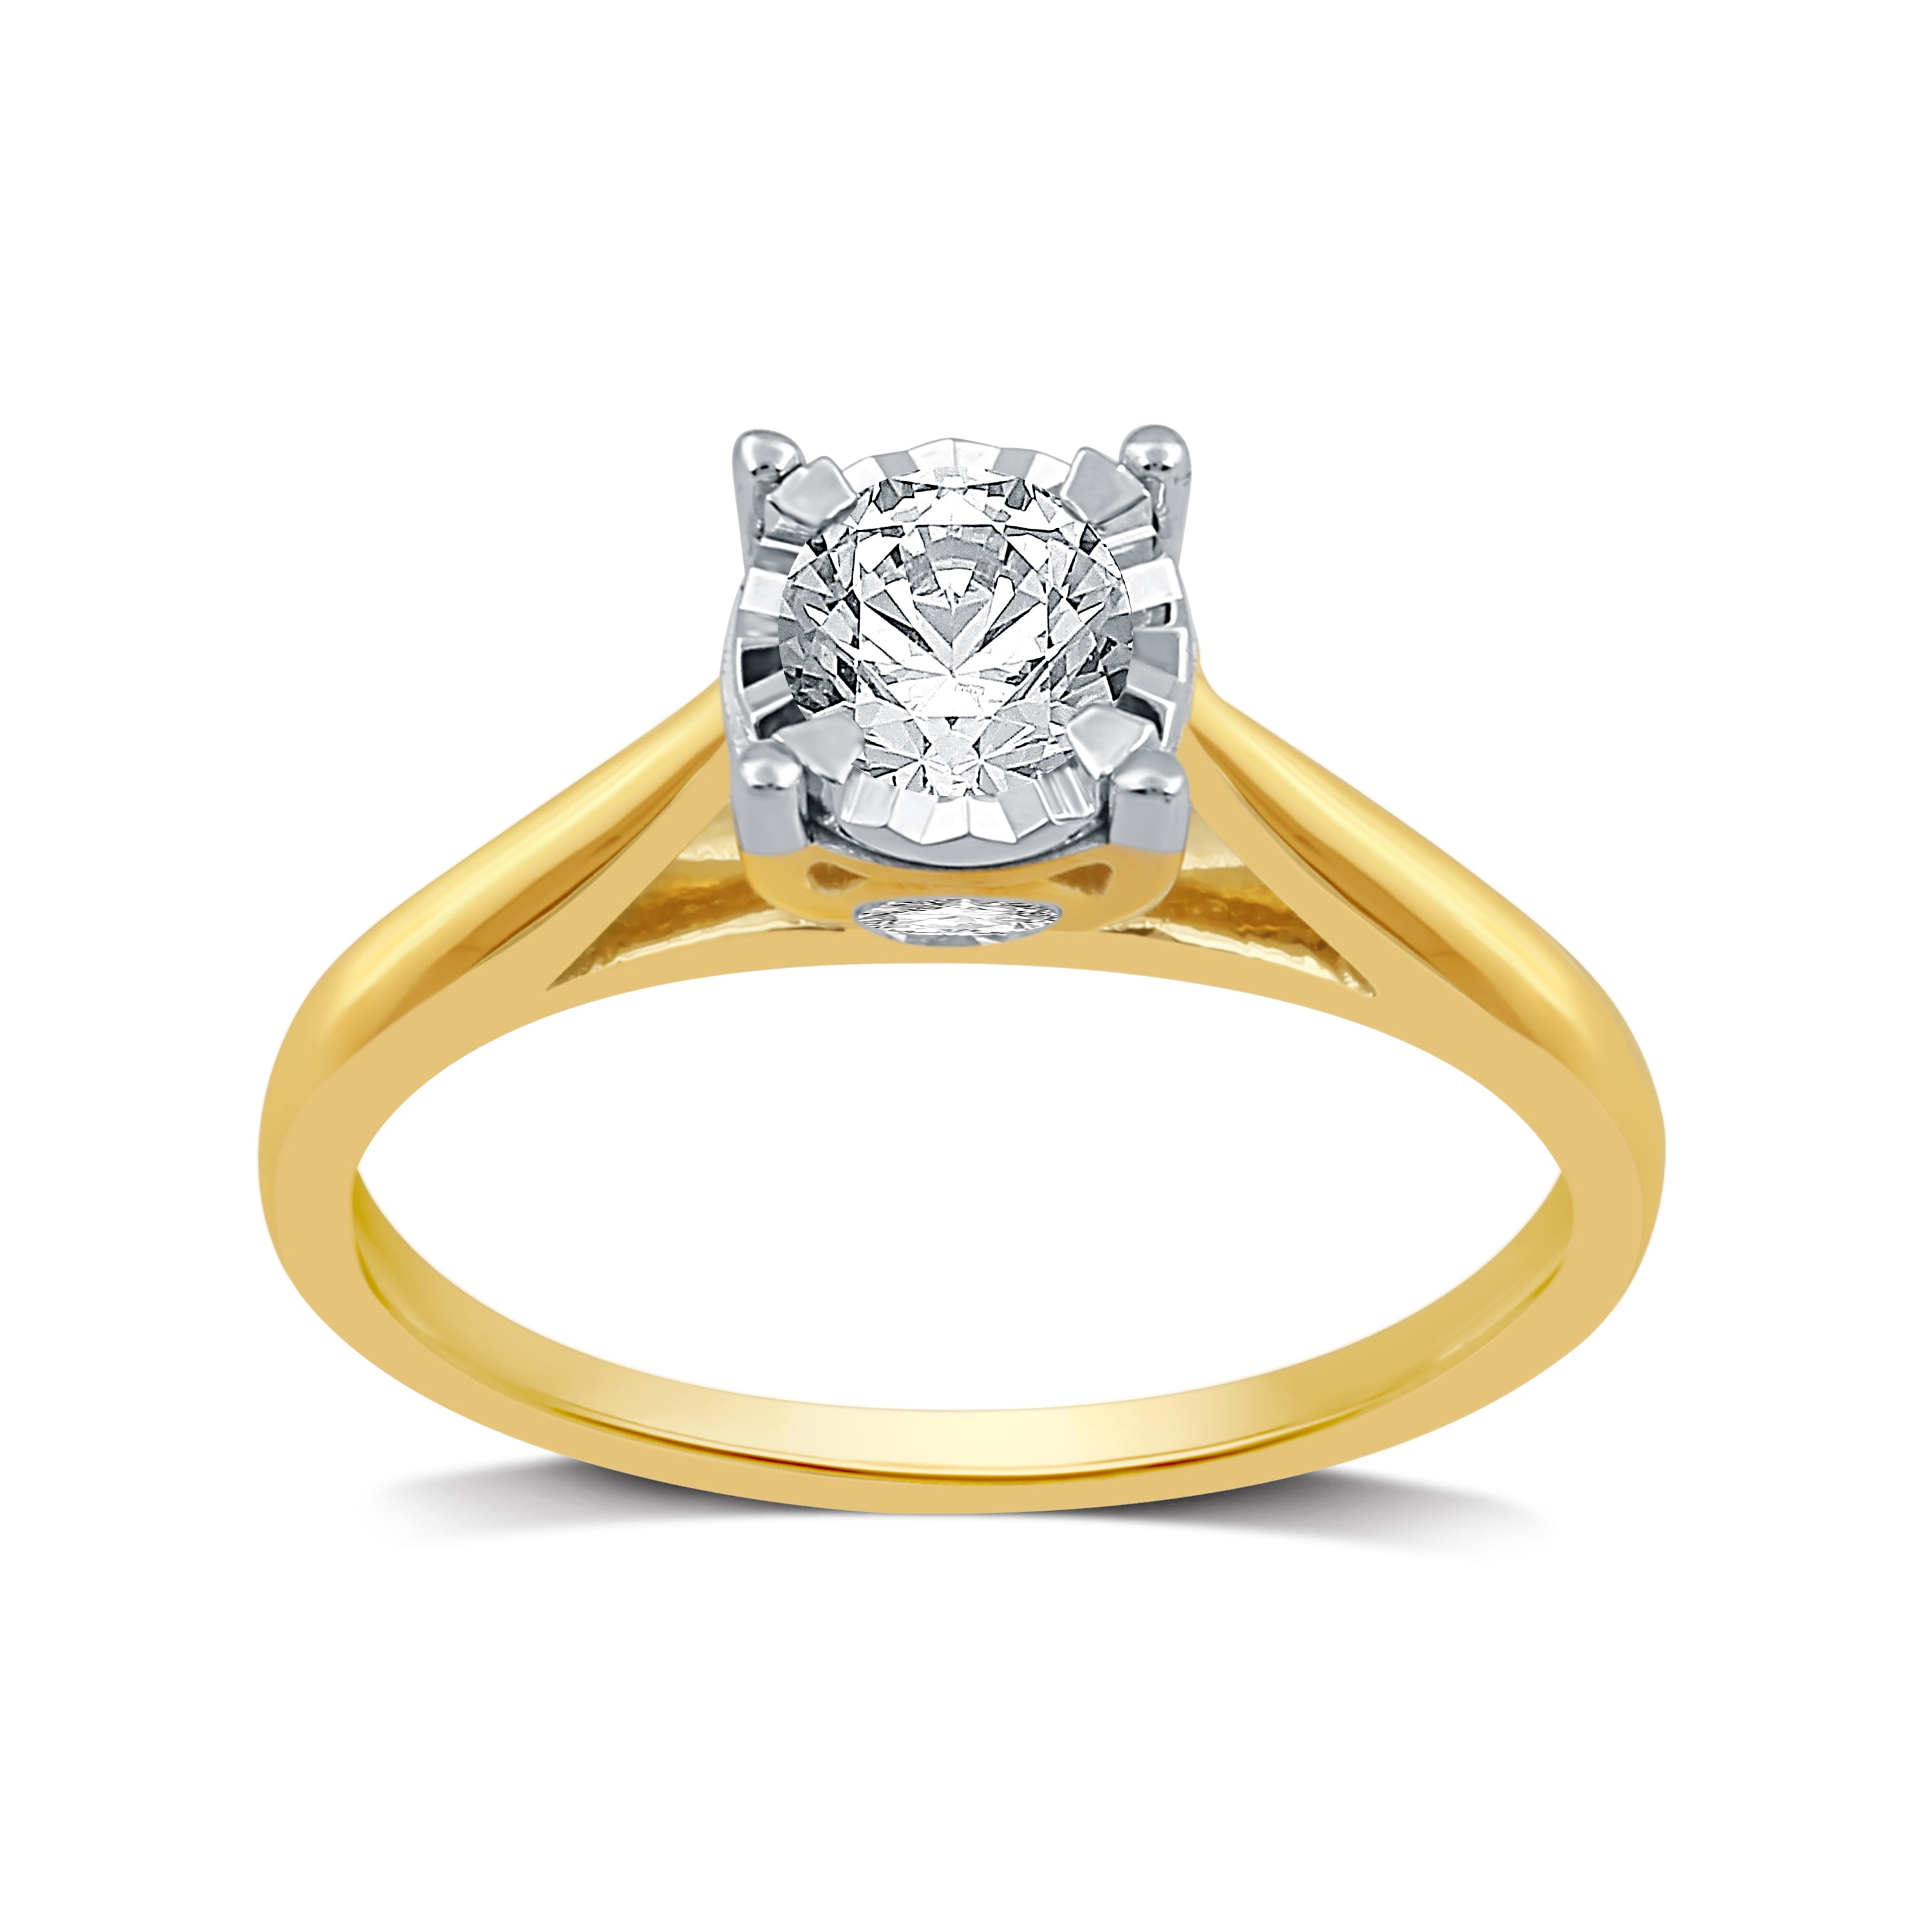 1.7 Carat Round Cut Yellow Diamond Solitaire Engagement Ring 14K White Gold Over 